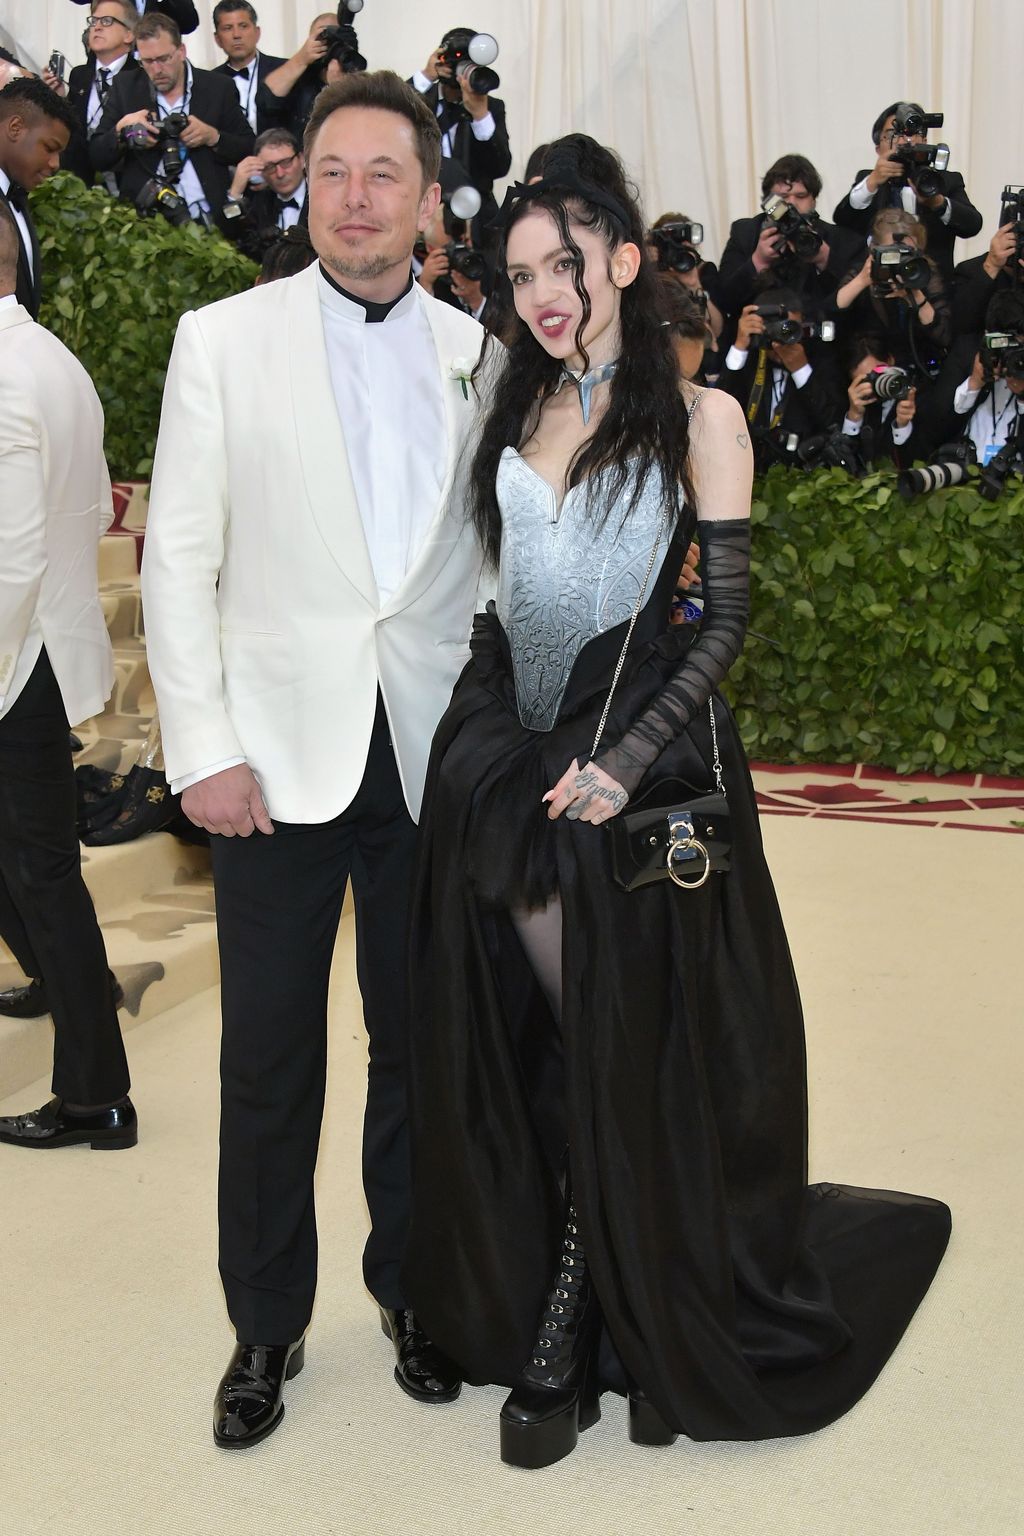 NEW YORK, NY - MAY 07:  Elon Musk and Grimes attend the Heavenly Bodies: Fashion & The Catholic Imagination Costume Institute Gala at The Metropolitan Museum of Art on May 7, 2018 in New York City.  (Photo by Neilson Barnard/Getty Images)